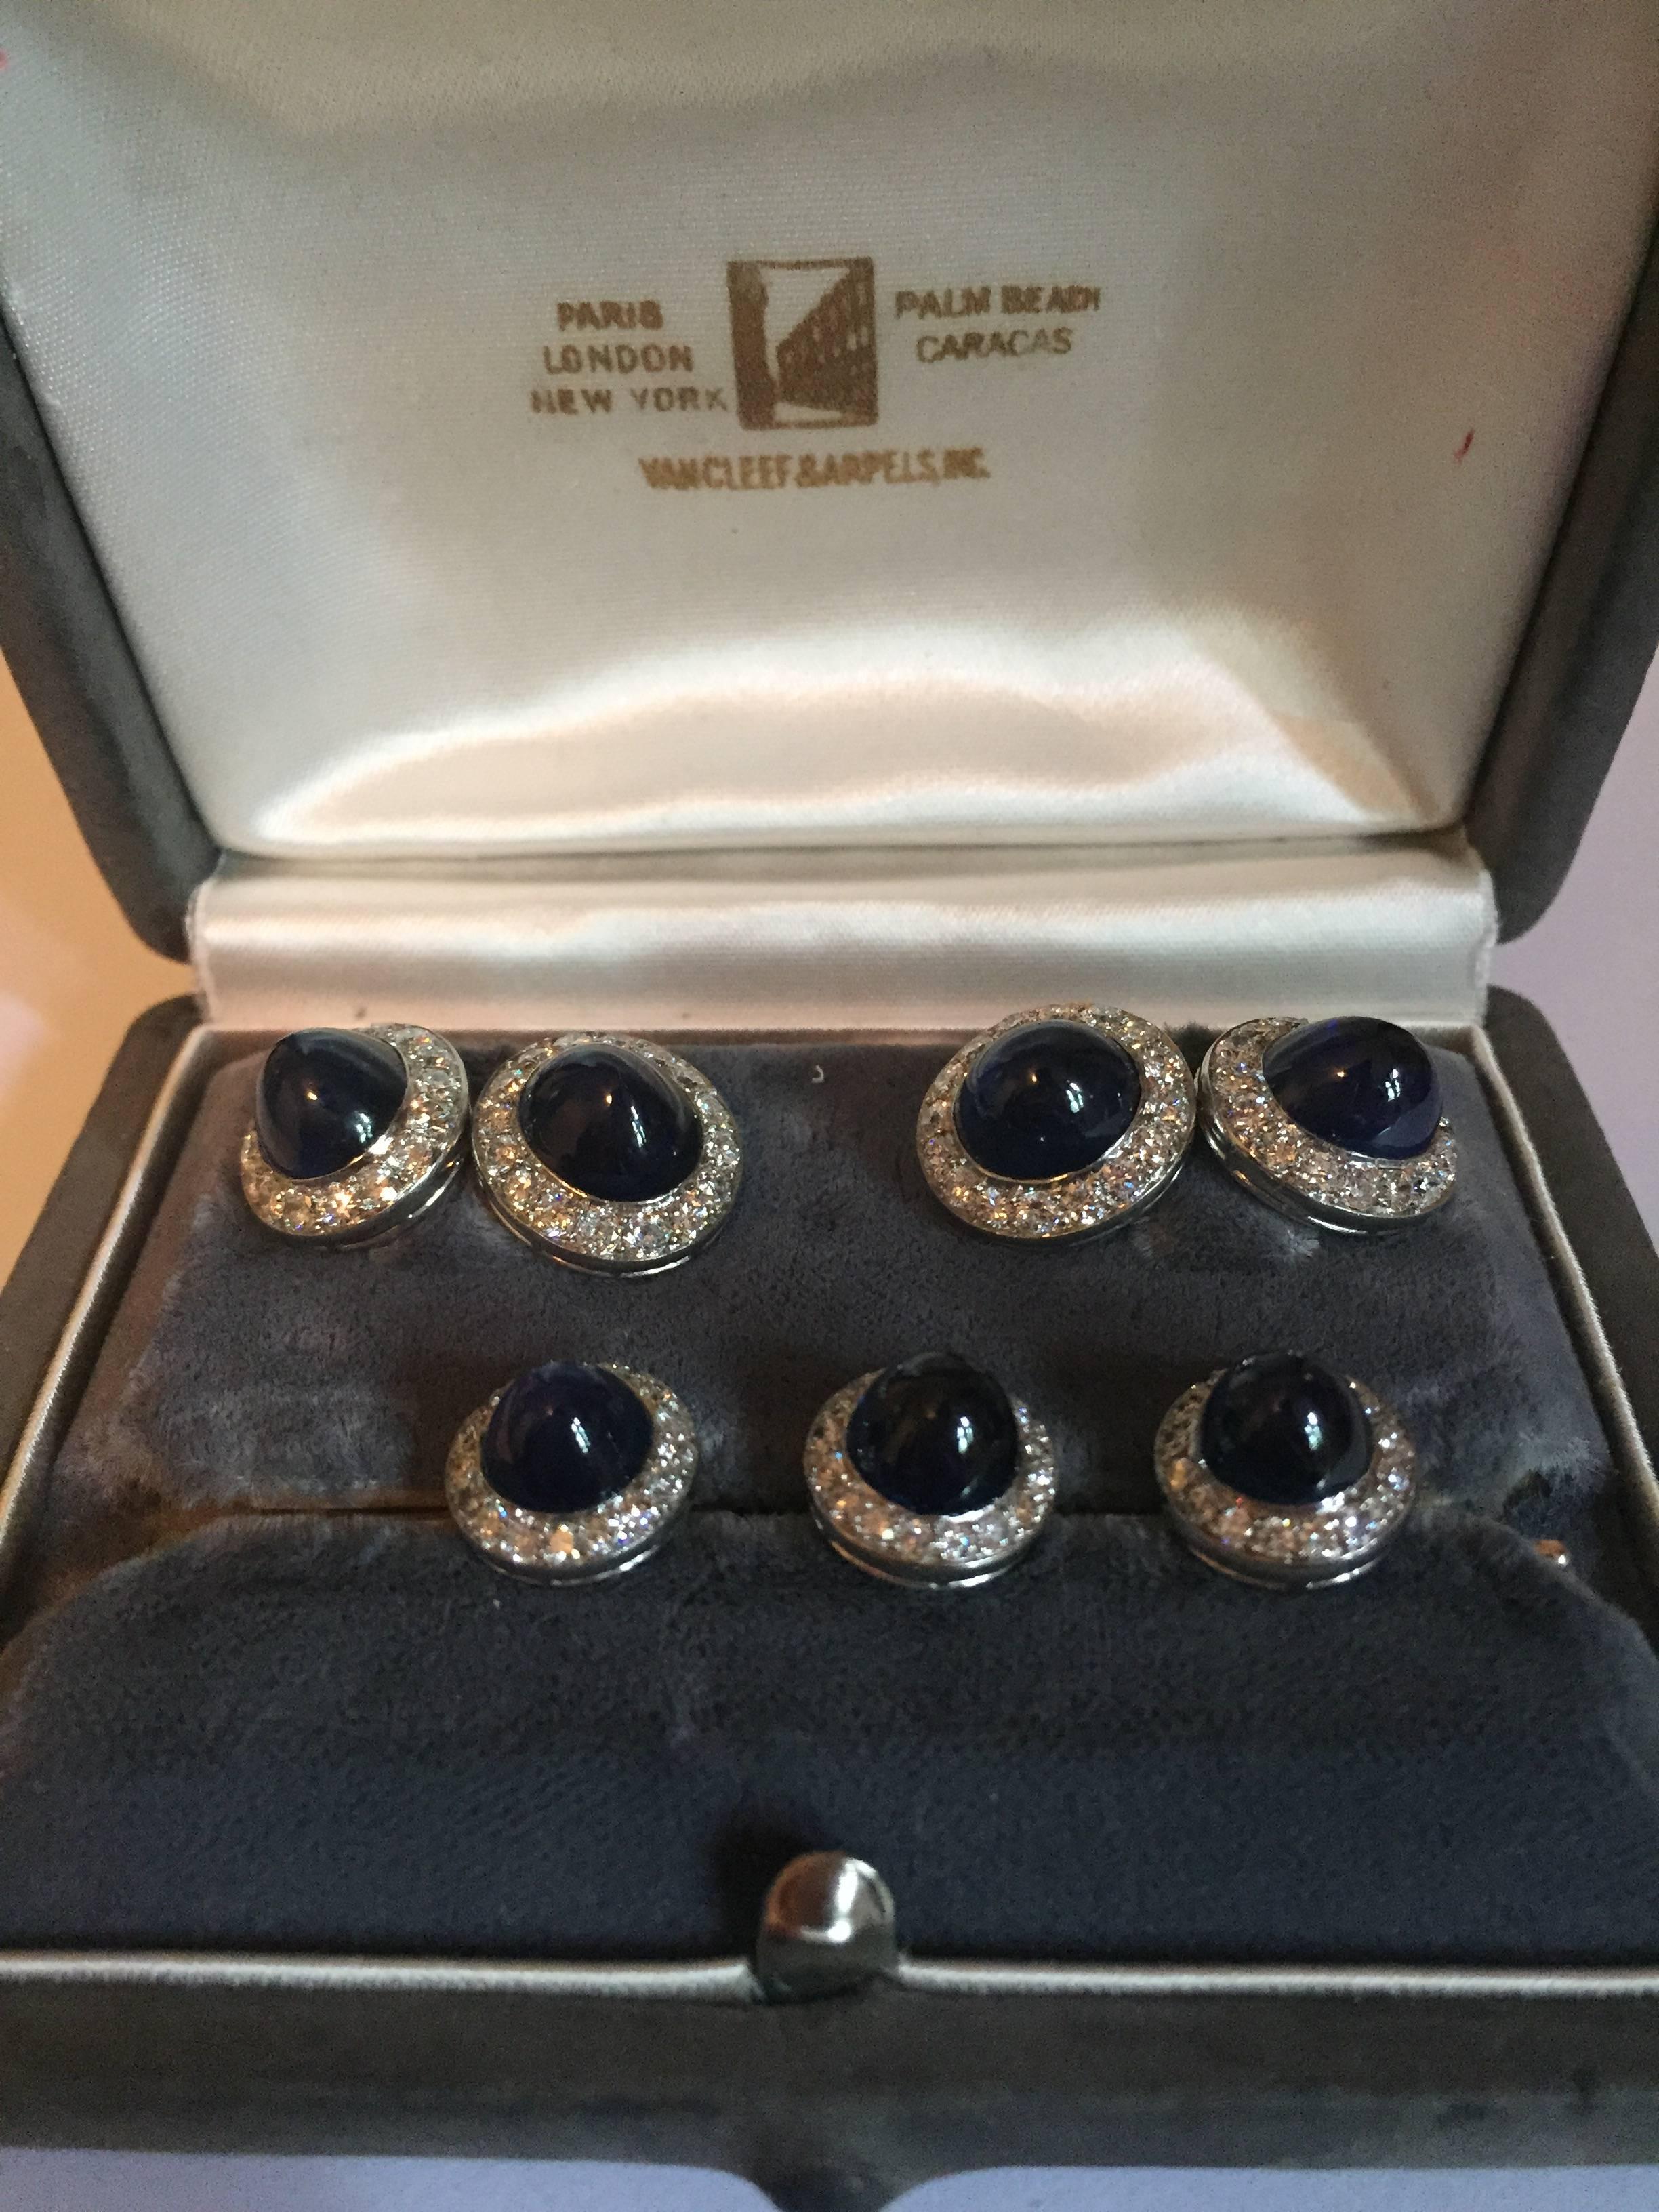 Vintage Van Cleef & Arpels platinum diamond and Burma sapphire cufflinks and stud set. Set contain approximately 35.00cts. in sapphires and approximately 5.00cts. in diamonds. Diamonds are E - F in color and VVS - VS in clarity. The set weighs 20.00